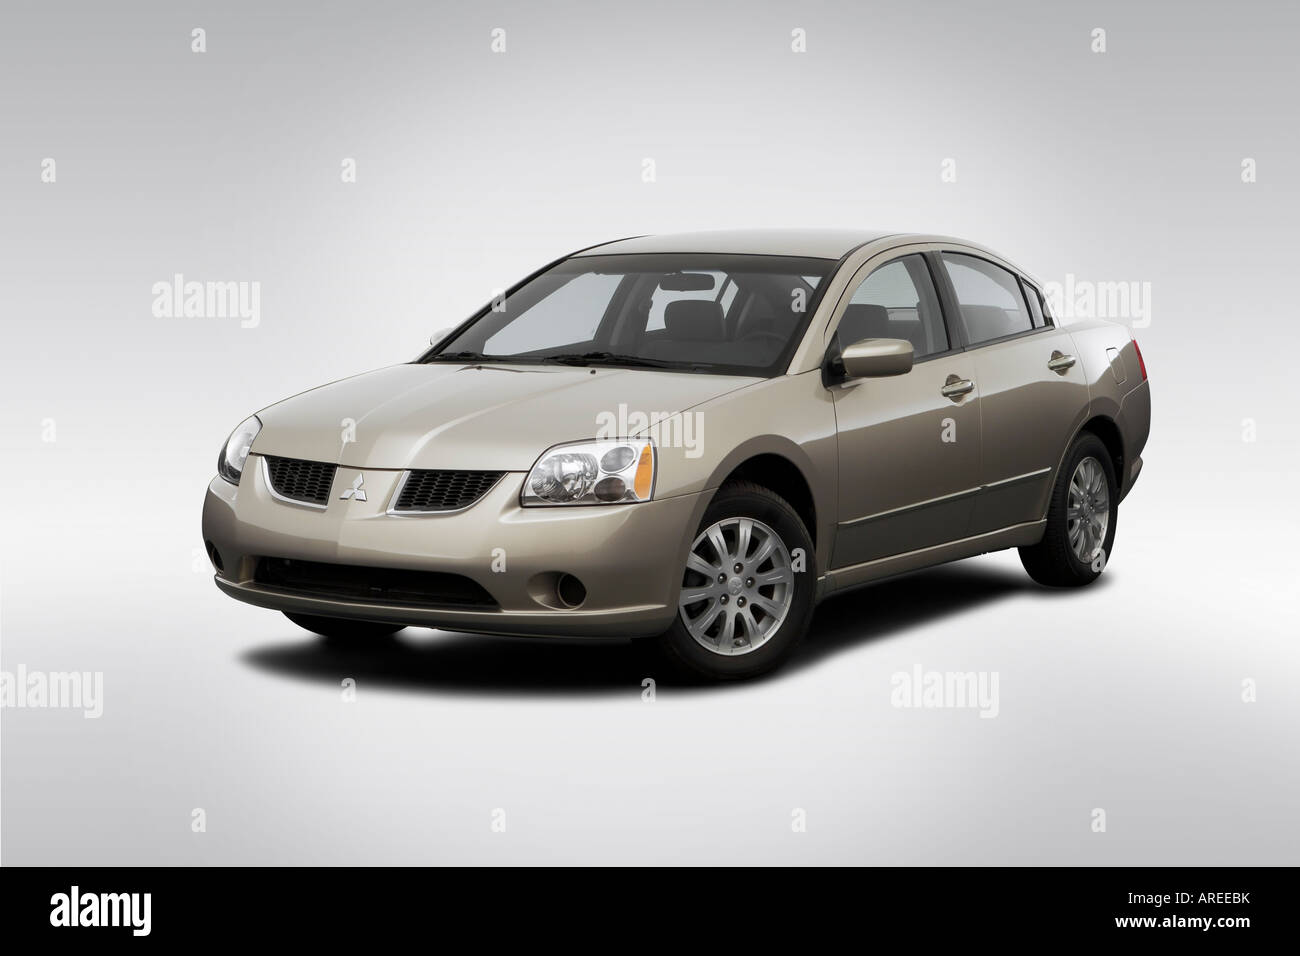 2006 Mitsubishi Galant ES in Beige - Front angle view Stock Photo - Alamy